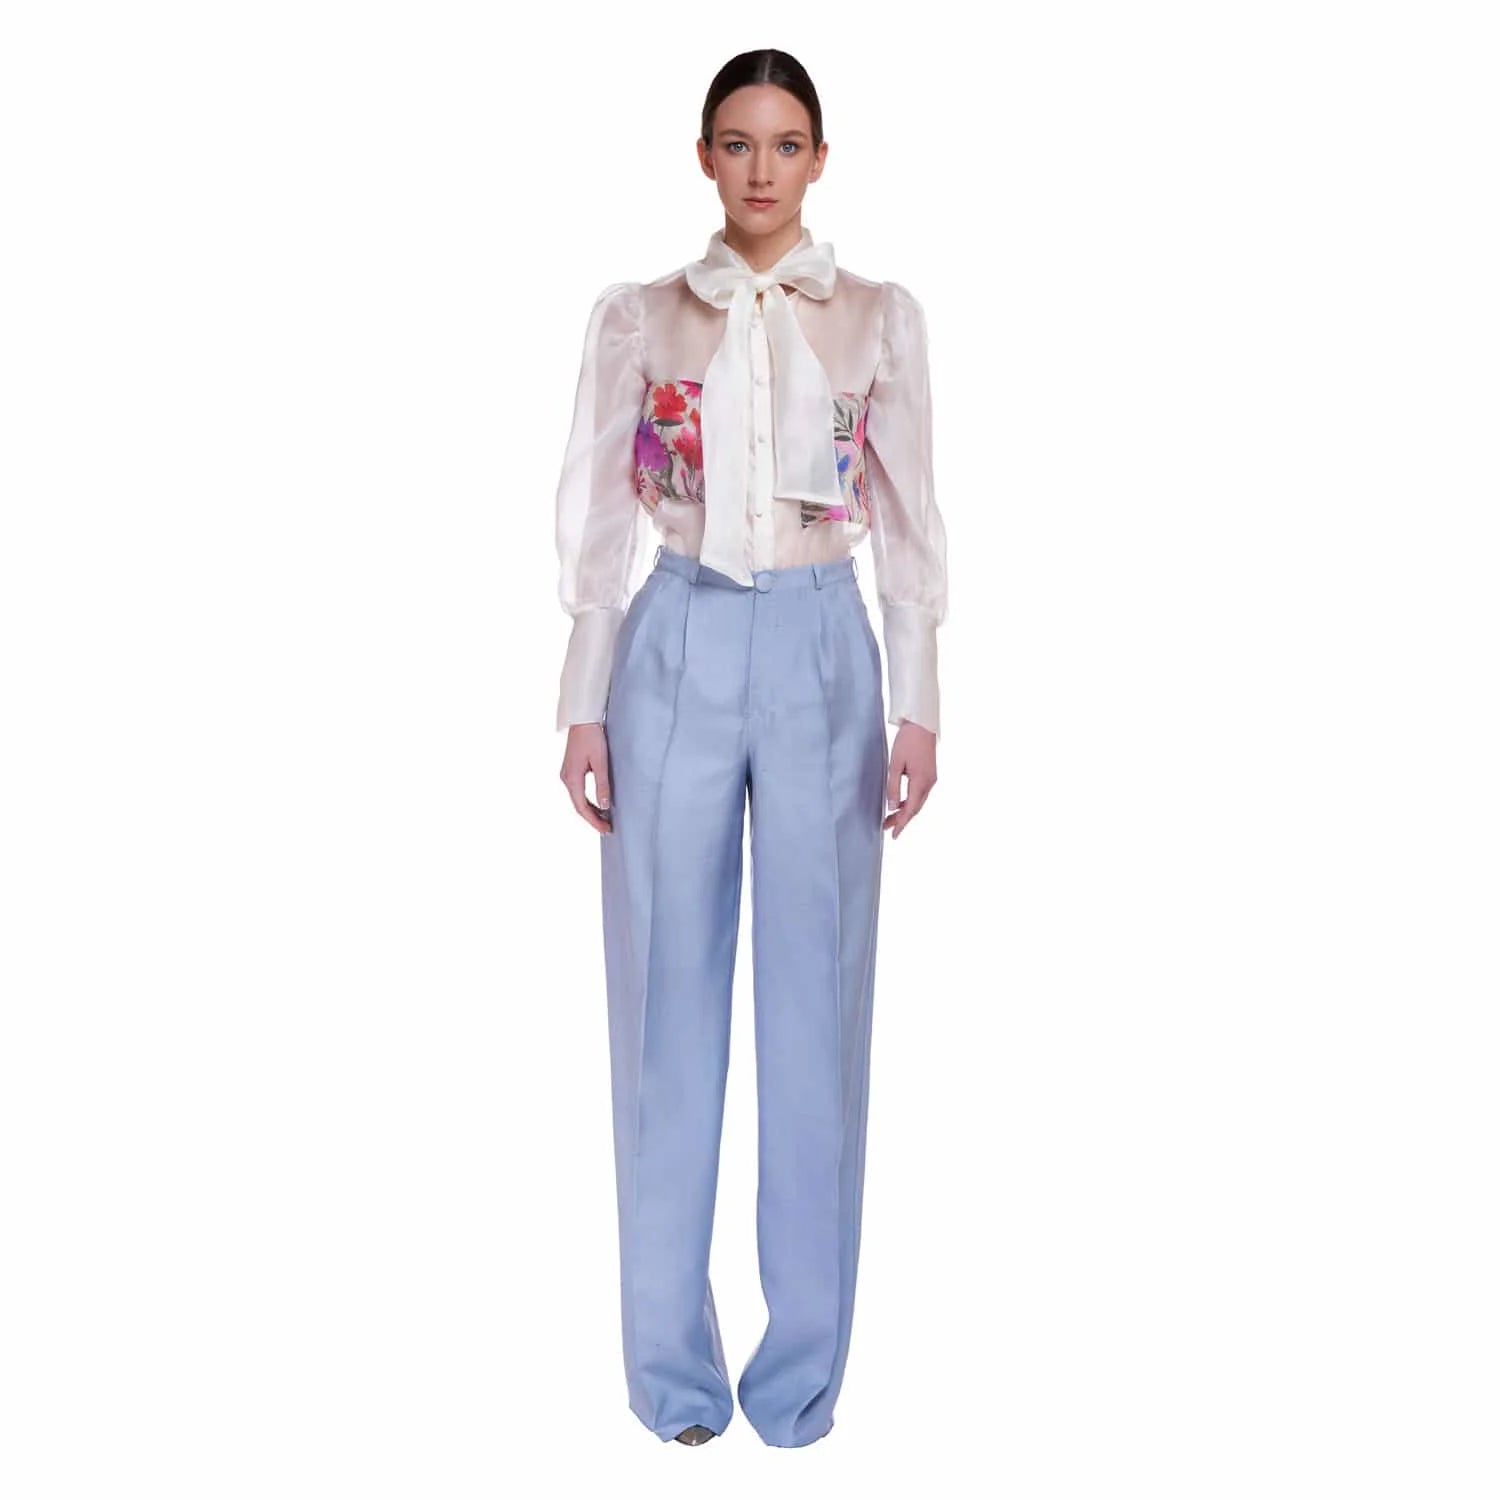 Organza blouse with floral pattern - Blouse